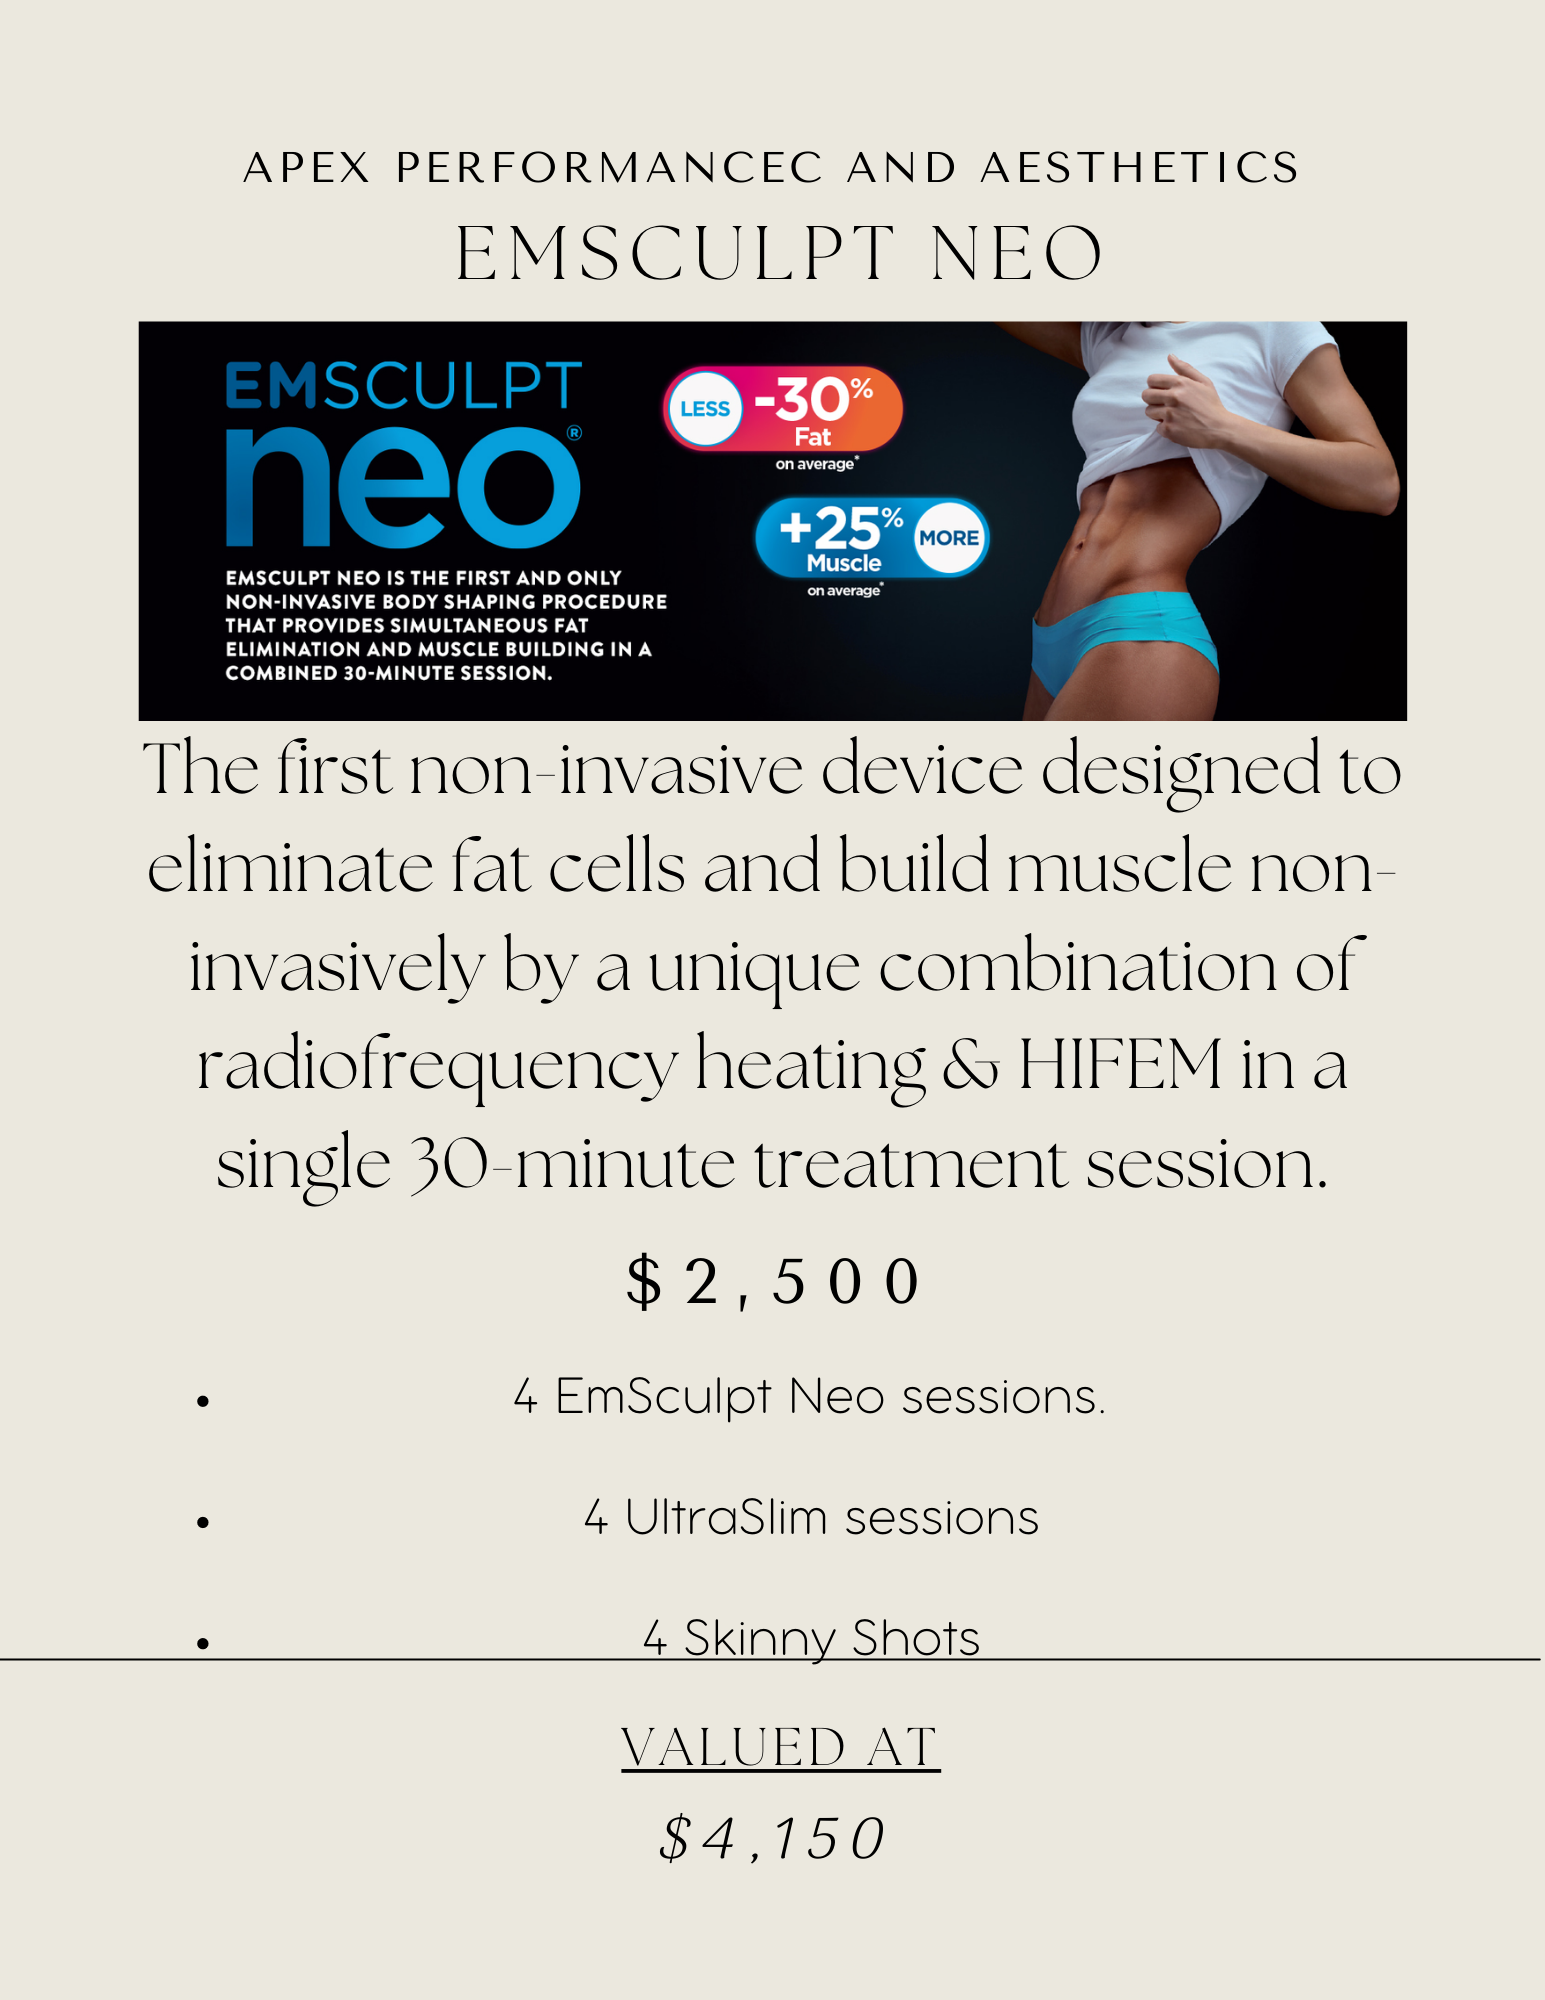 Emsculpt Neo 4 Sessions - Package | APEX Performance & Aesthetics in Sandy, UT